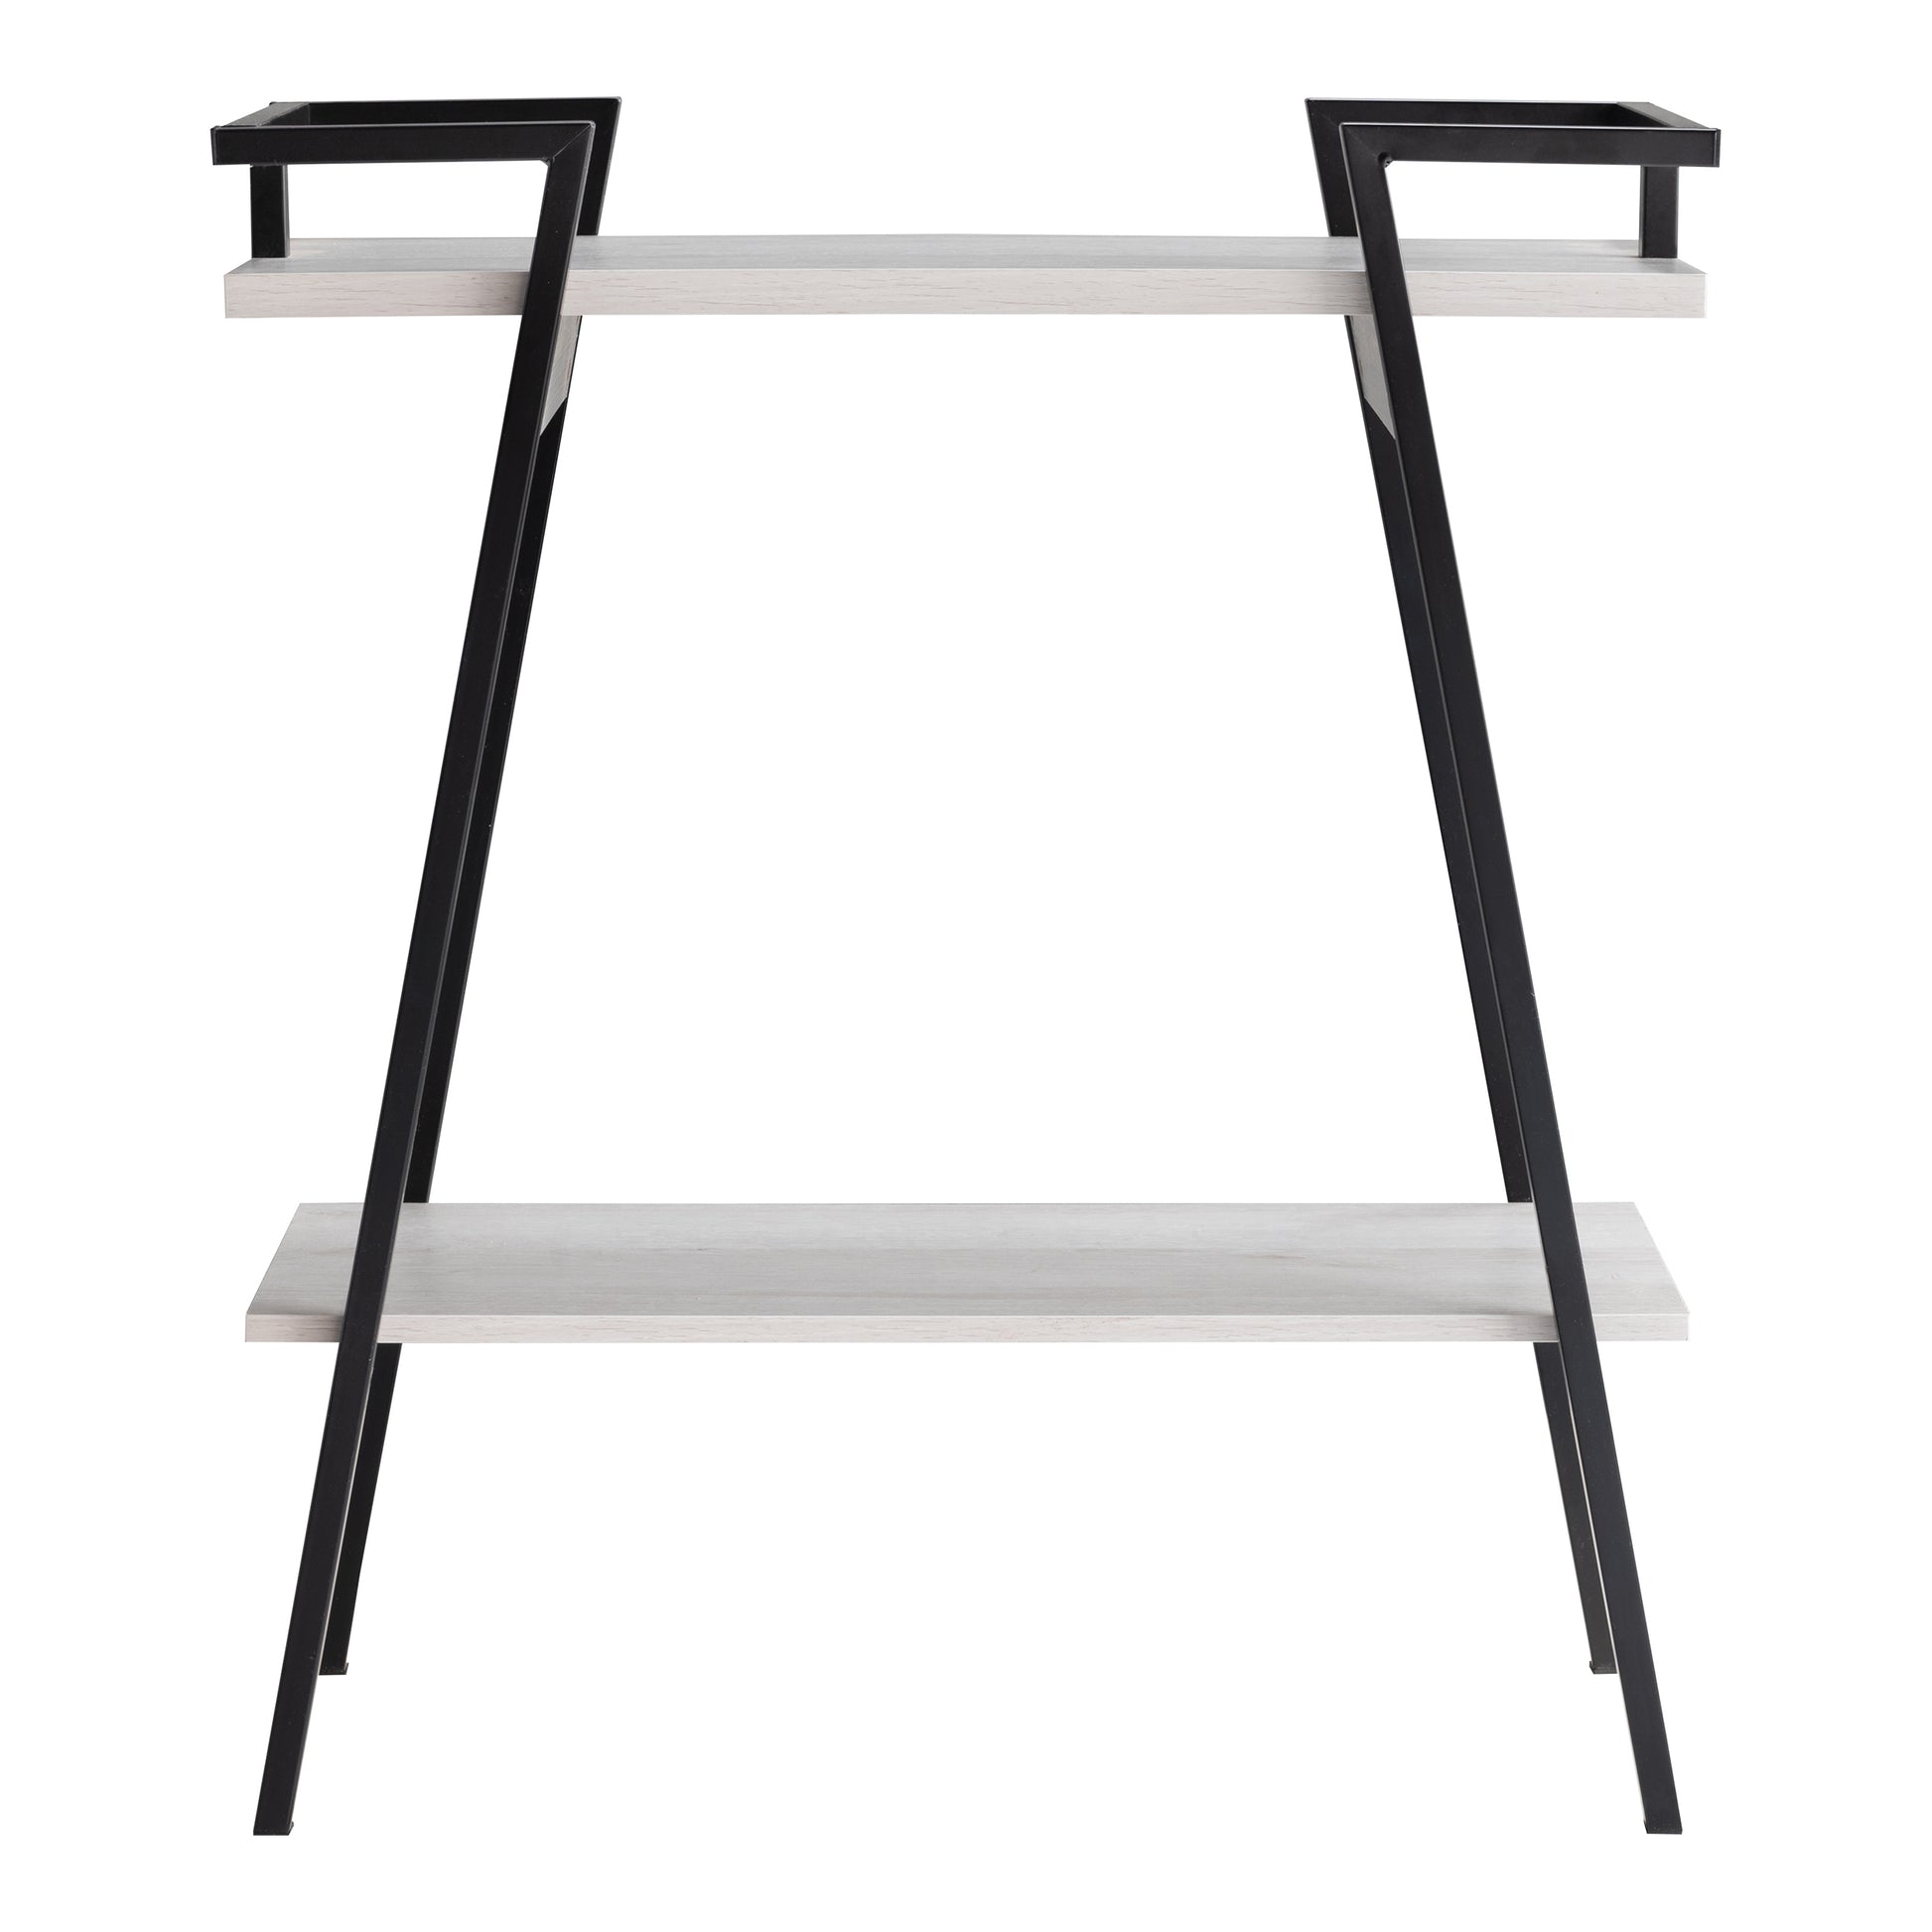 Front-facing urban industrial white oak and black two-shelf geometric console table on a white background